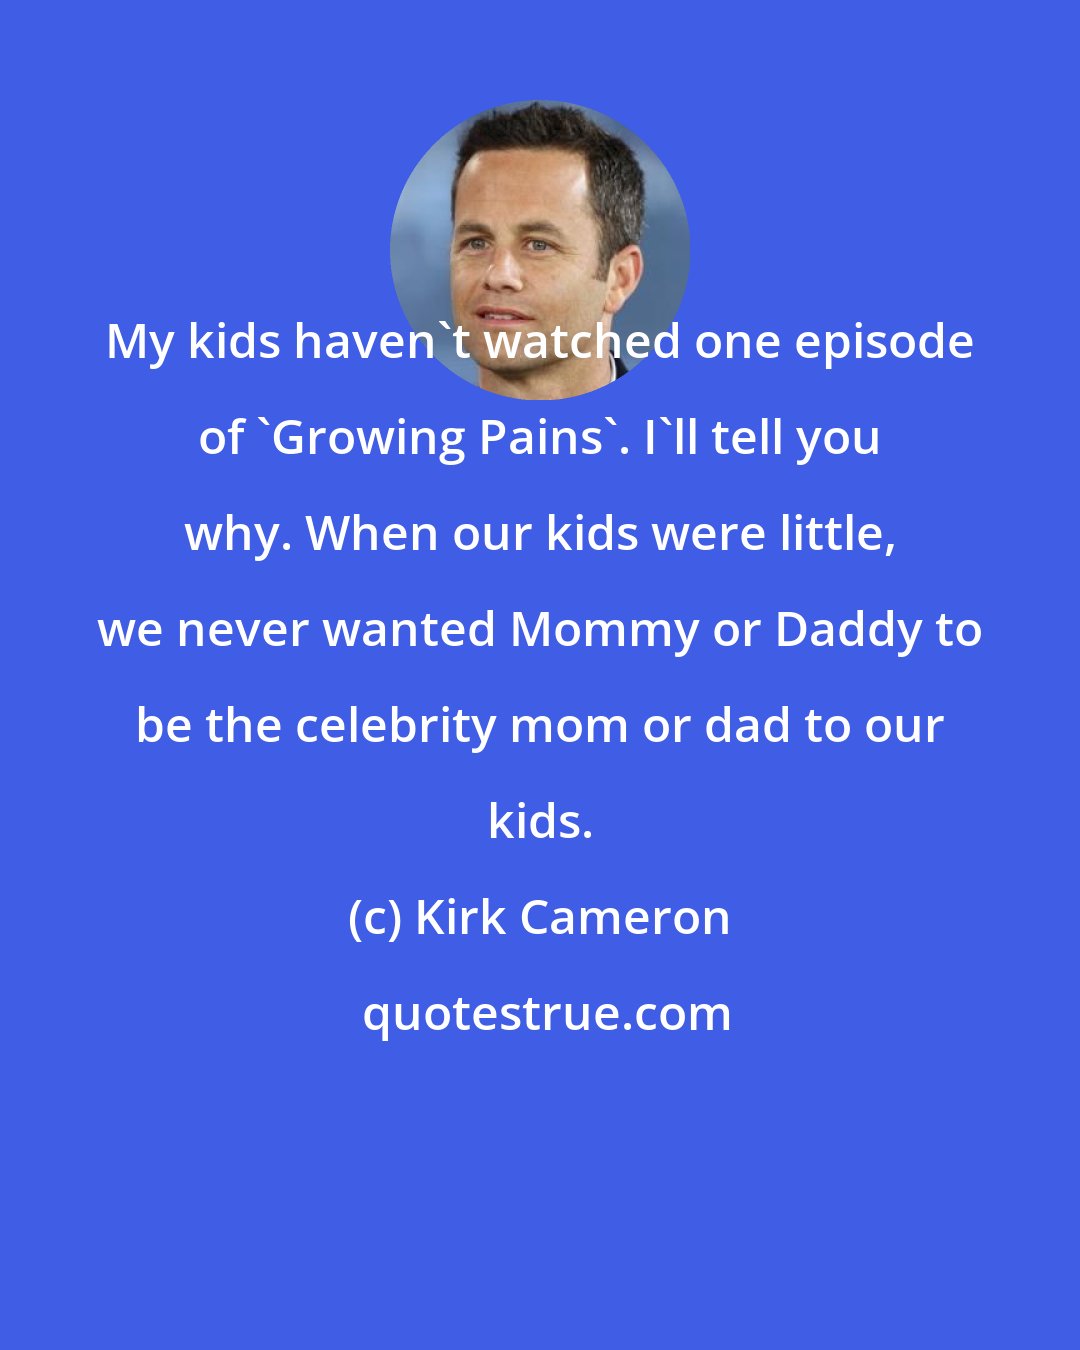 Kirk Cameron: My kids haven't watched one episode of 'Growing Pains'. I'll tell you why. When our kids were little, we never wanted Mommy or Daddy to be the celebrity mom or dad to our kids.